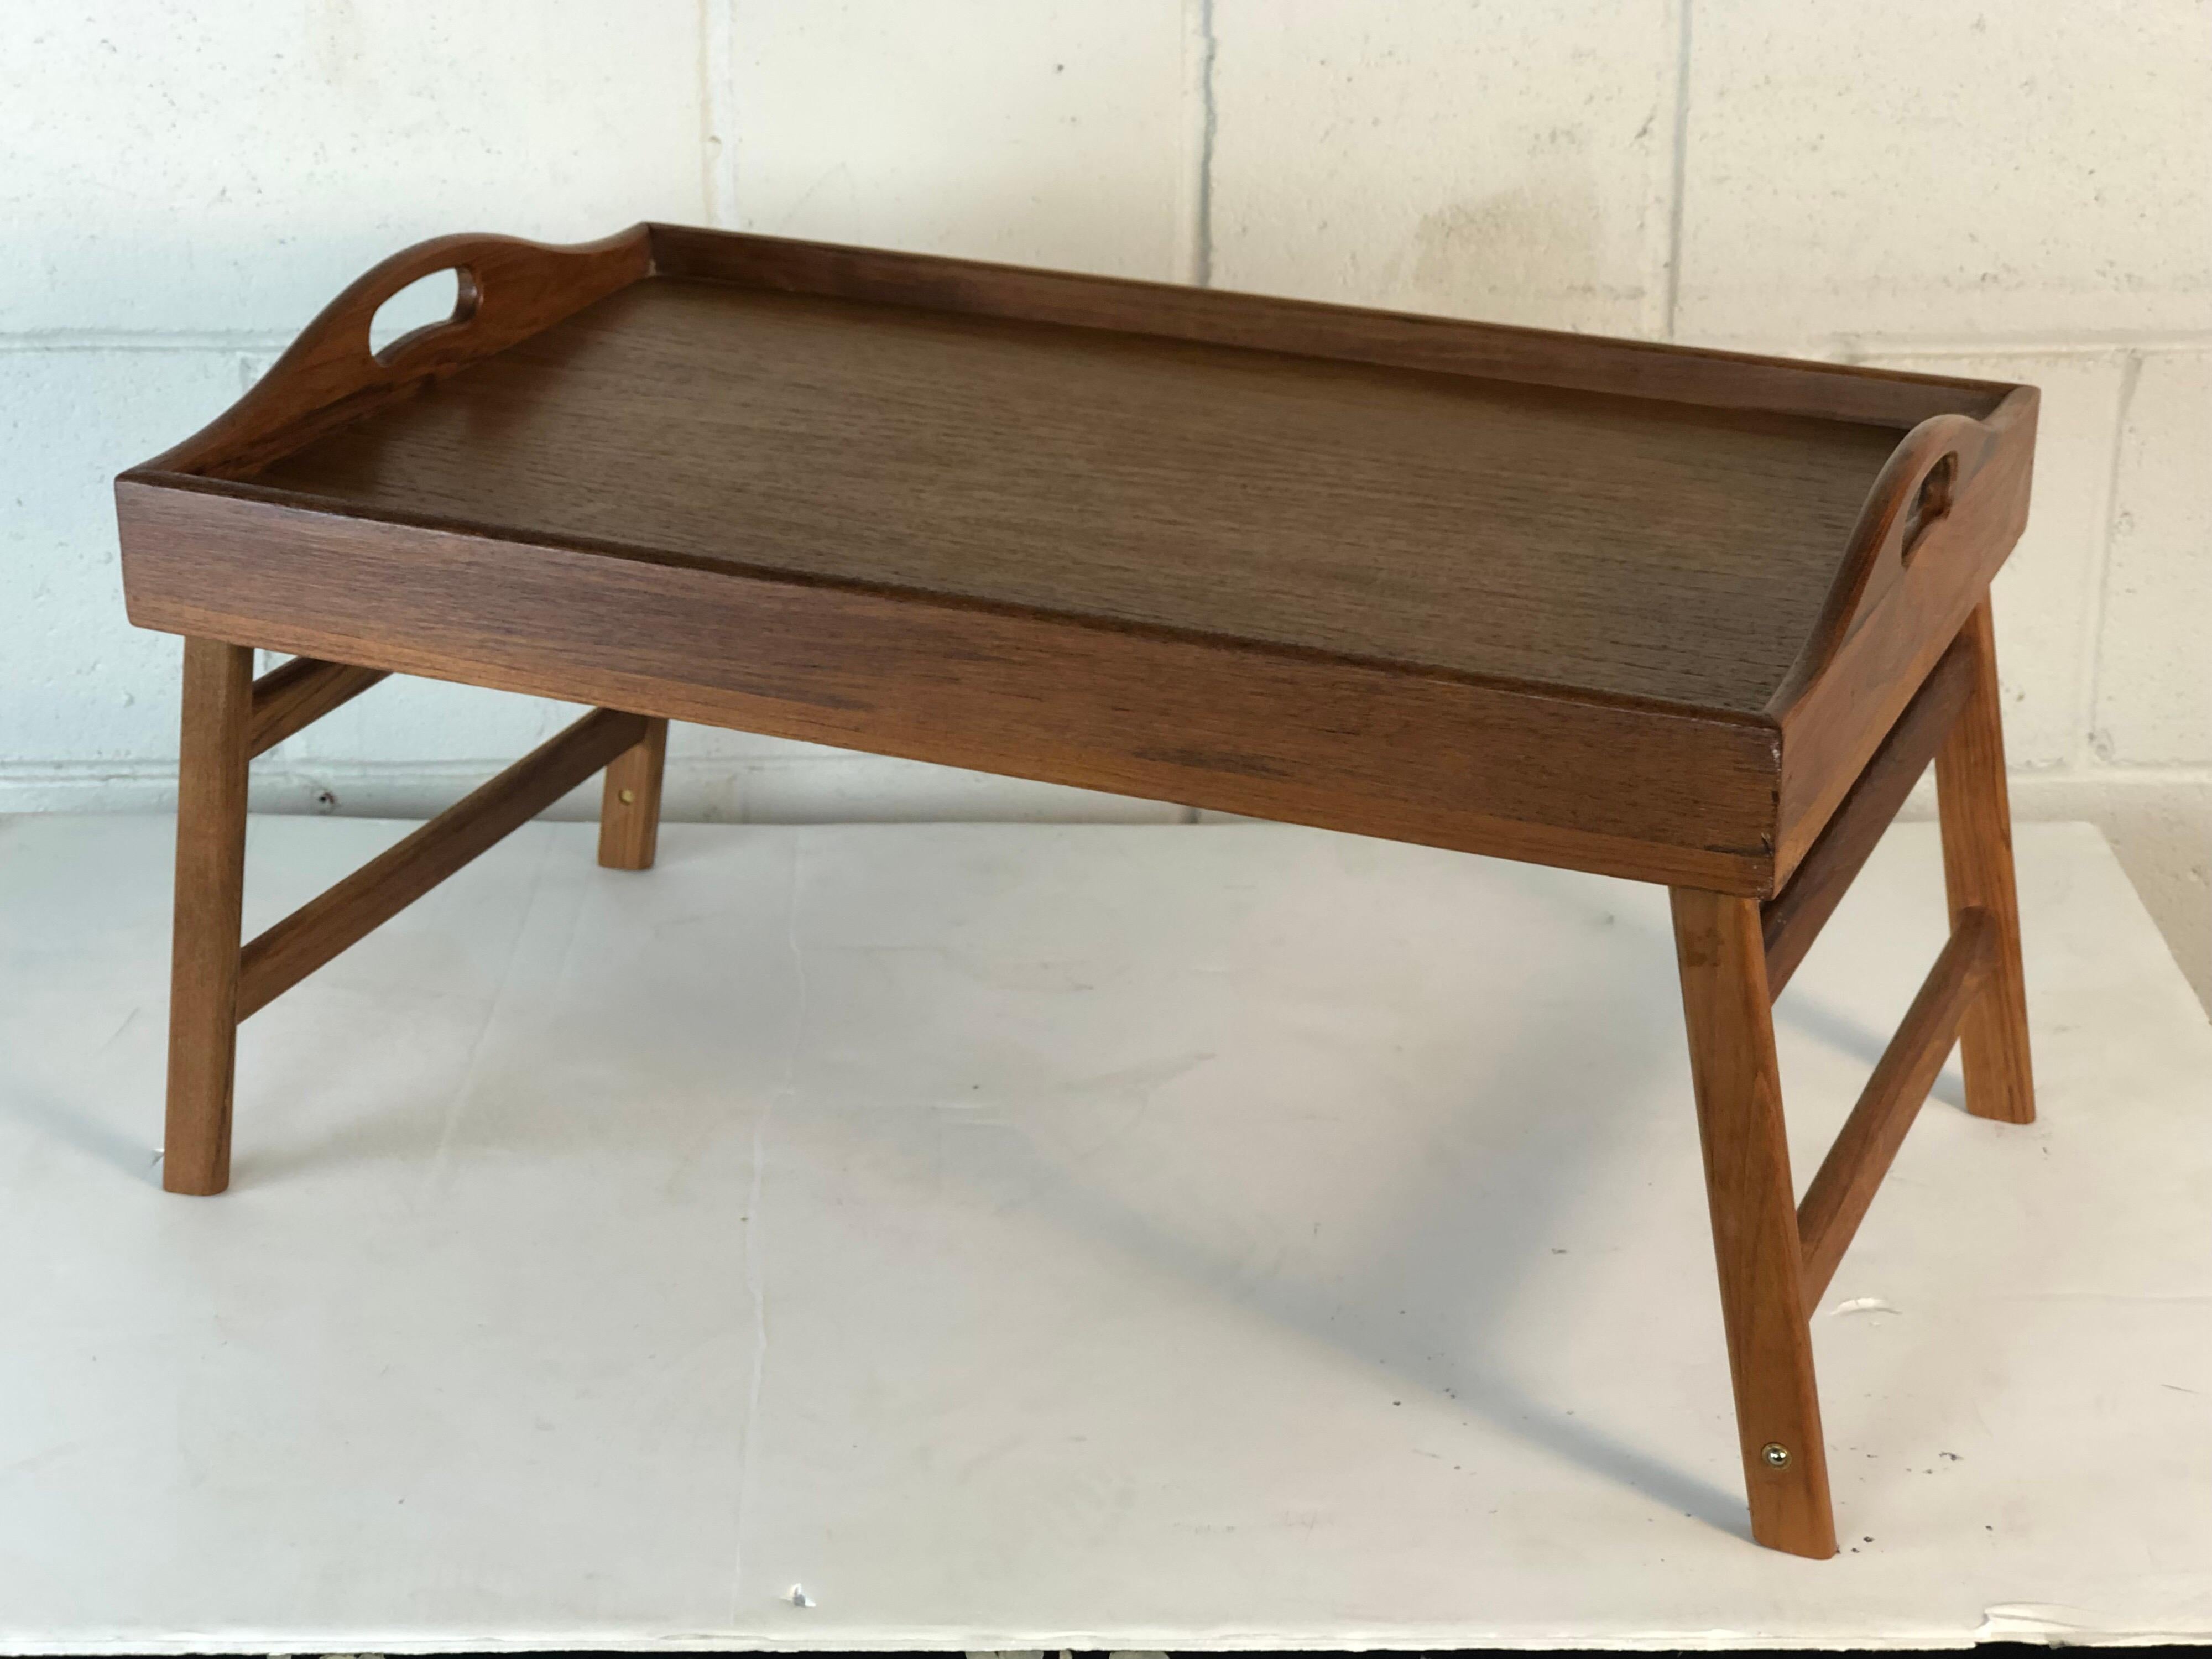 Teak wood folding breakfast serving tray that can be used for a bed serving tray or just a tray. Marked underneath.
Measurements fully open: 22” L x 13.75” W x 12” H.